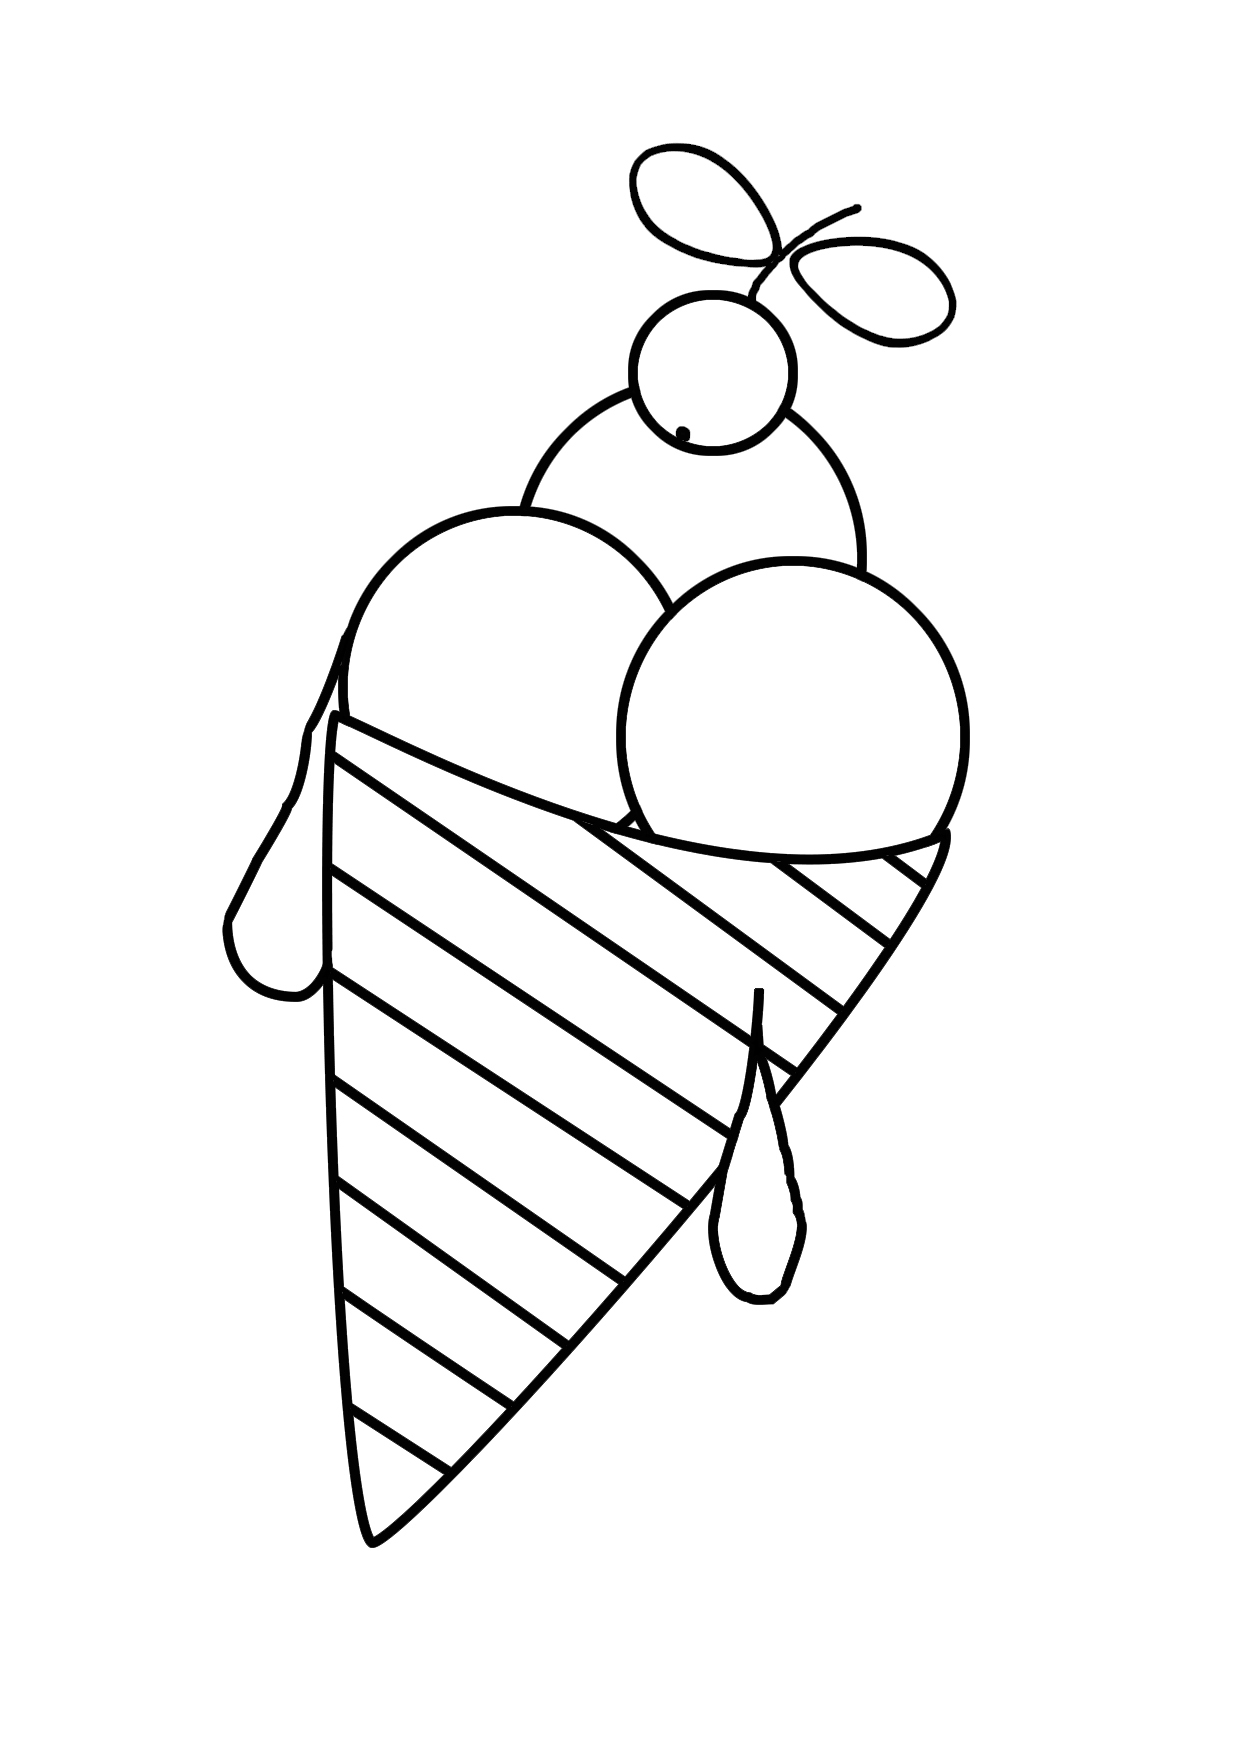 Summer Coloring Pages to Print